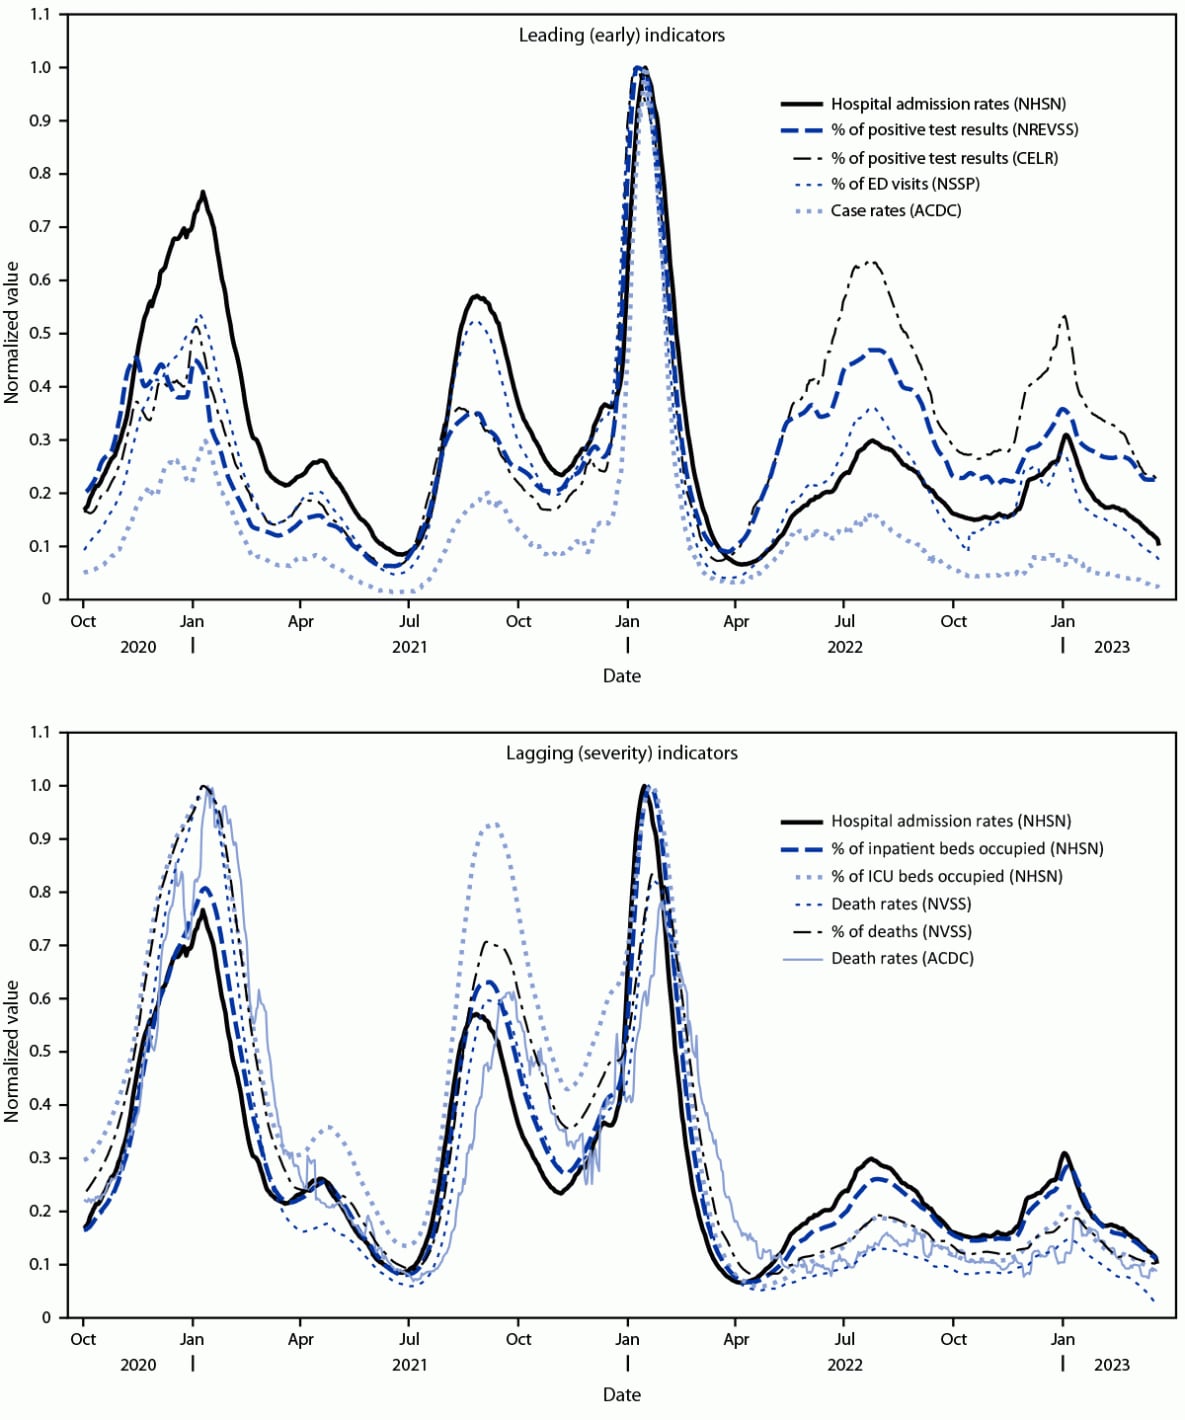 The figure consists of two panels showing trends in normalized values of leading (panel A) and lagging (panel B) COVID-19 surveillance indicators in the United States during October 1, 2022–March 22, 2023.